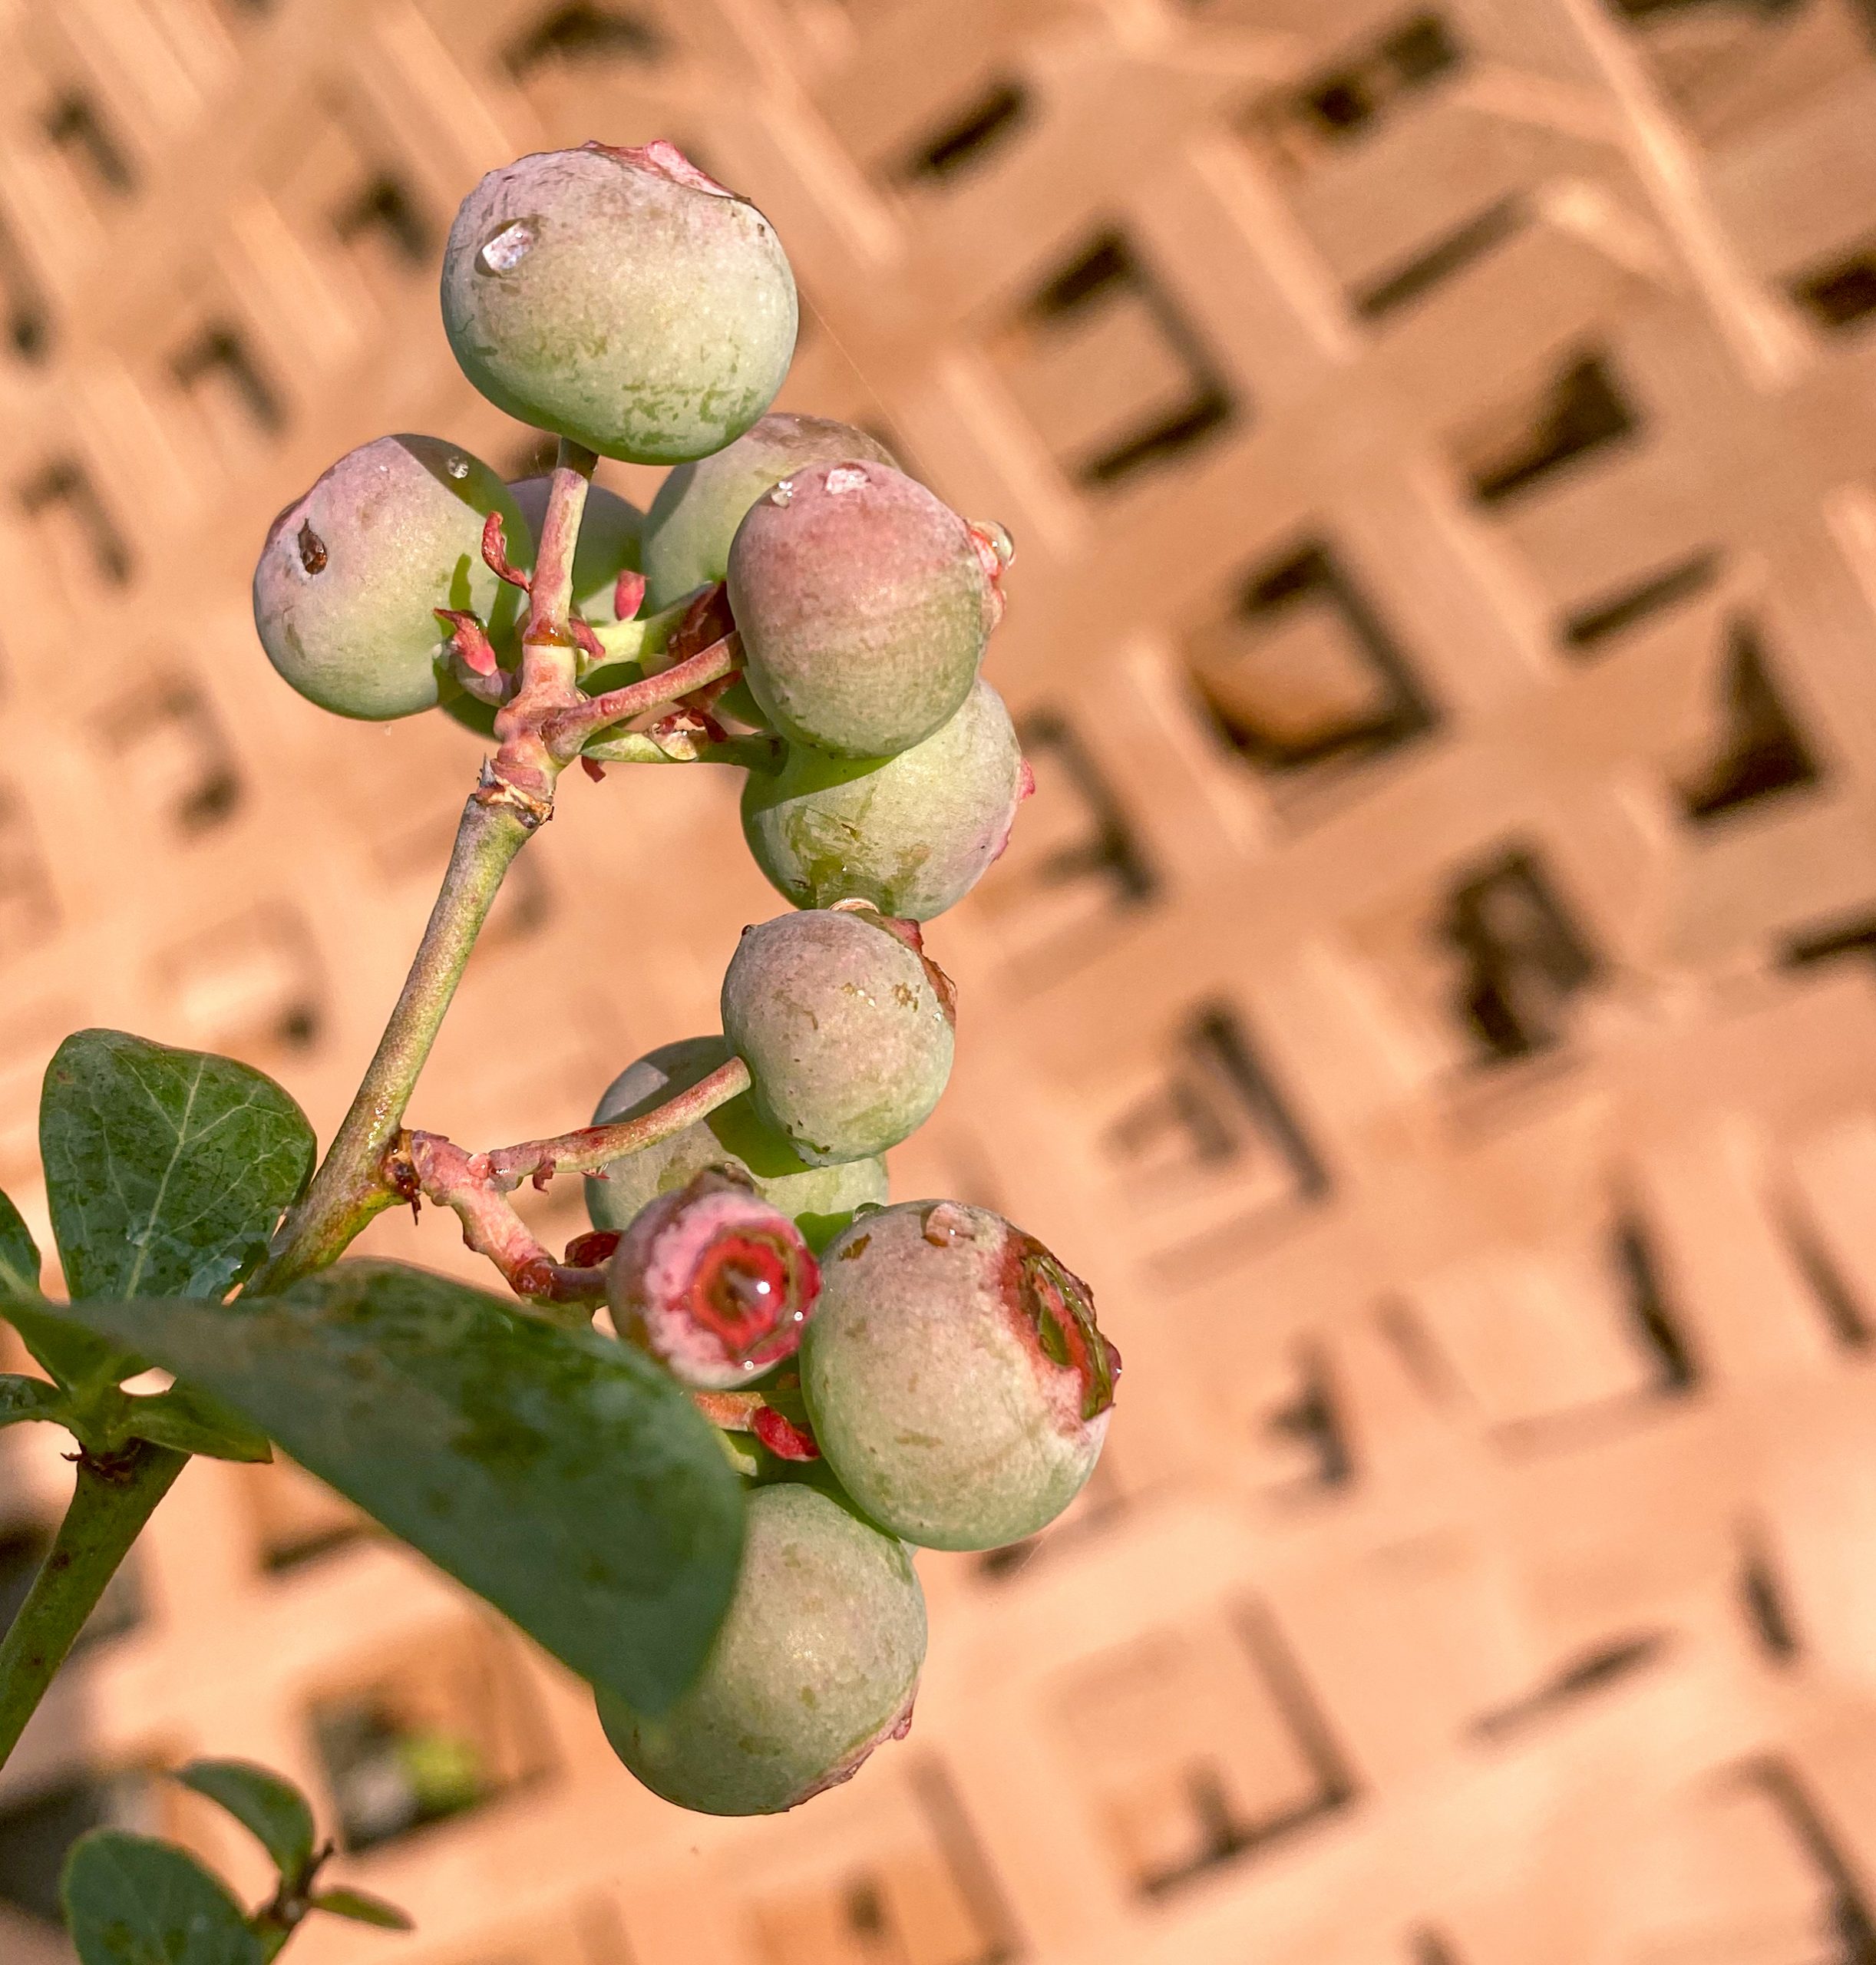 How To Grow Blueberries in Pots